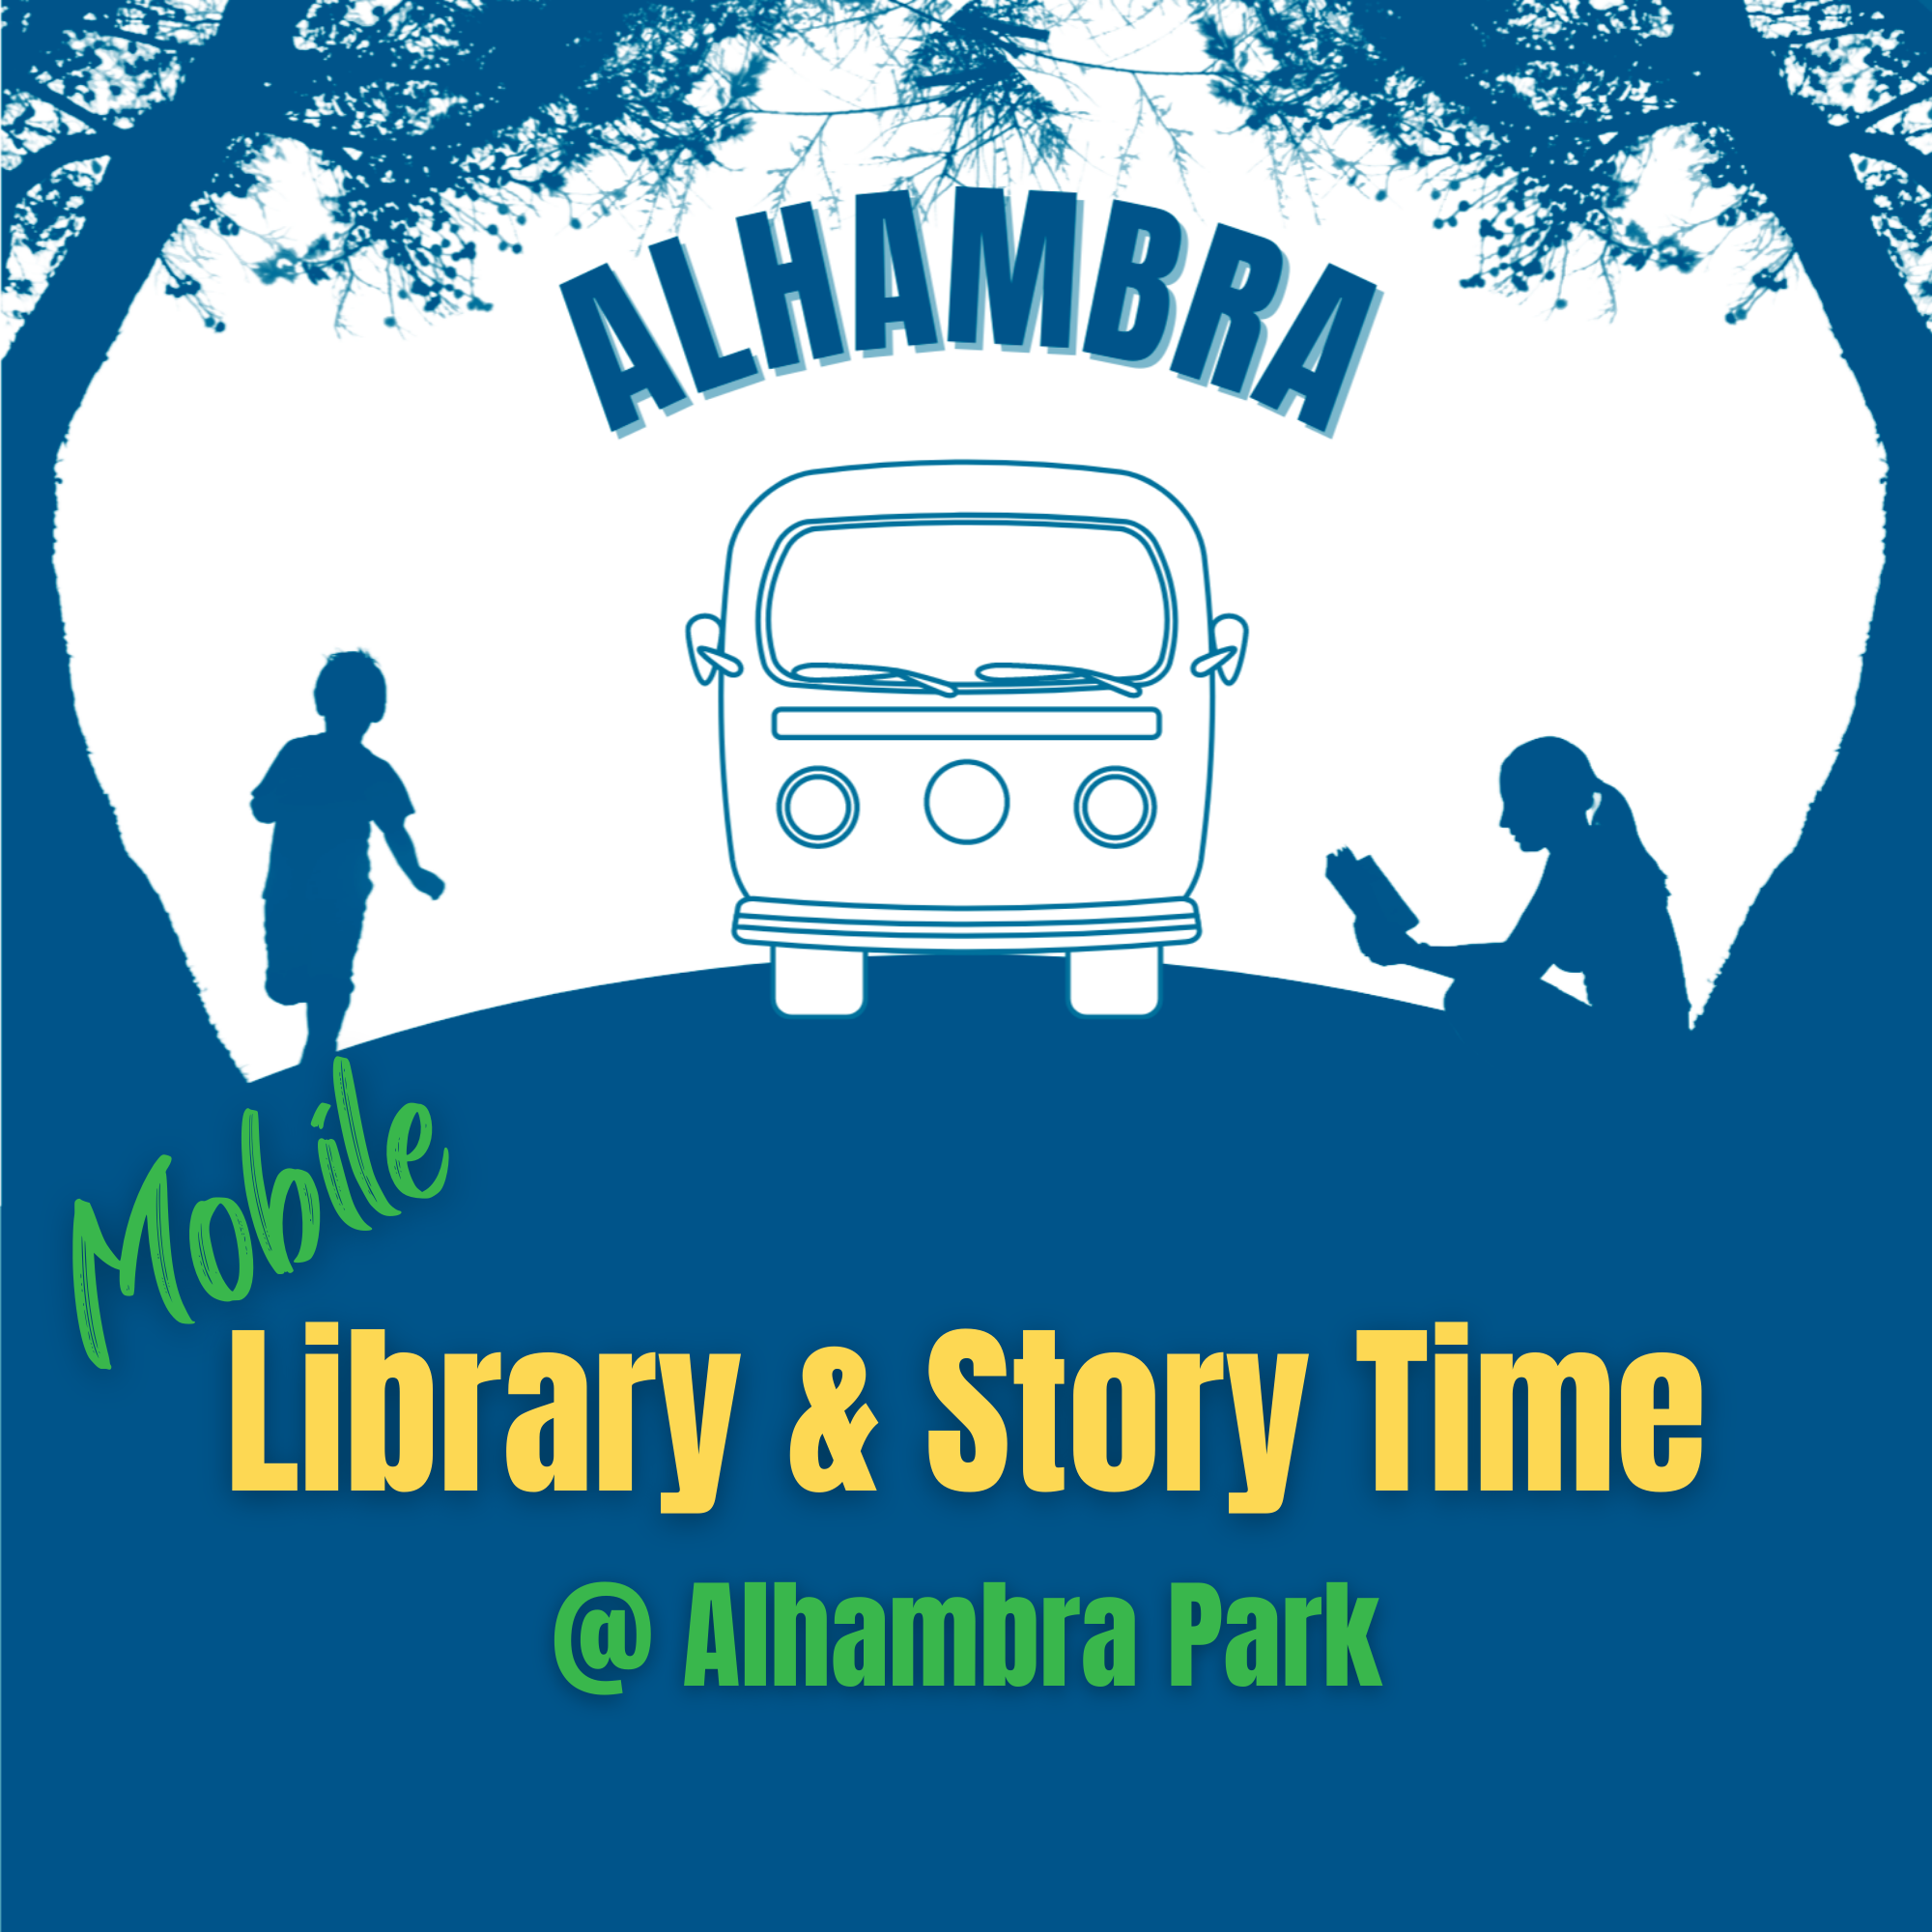 Mobile Library and Story Time @ Alhambra Park